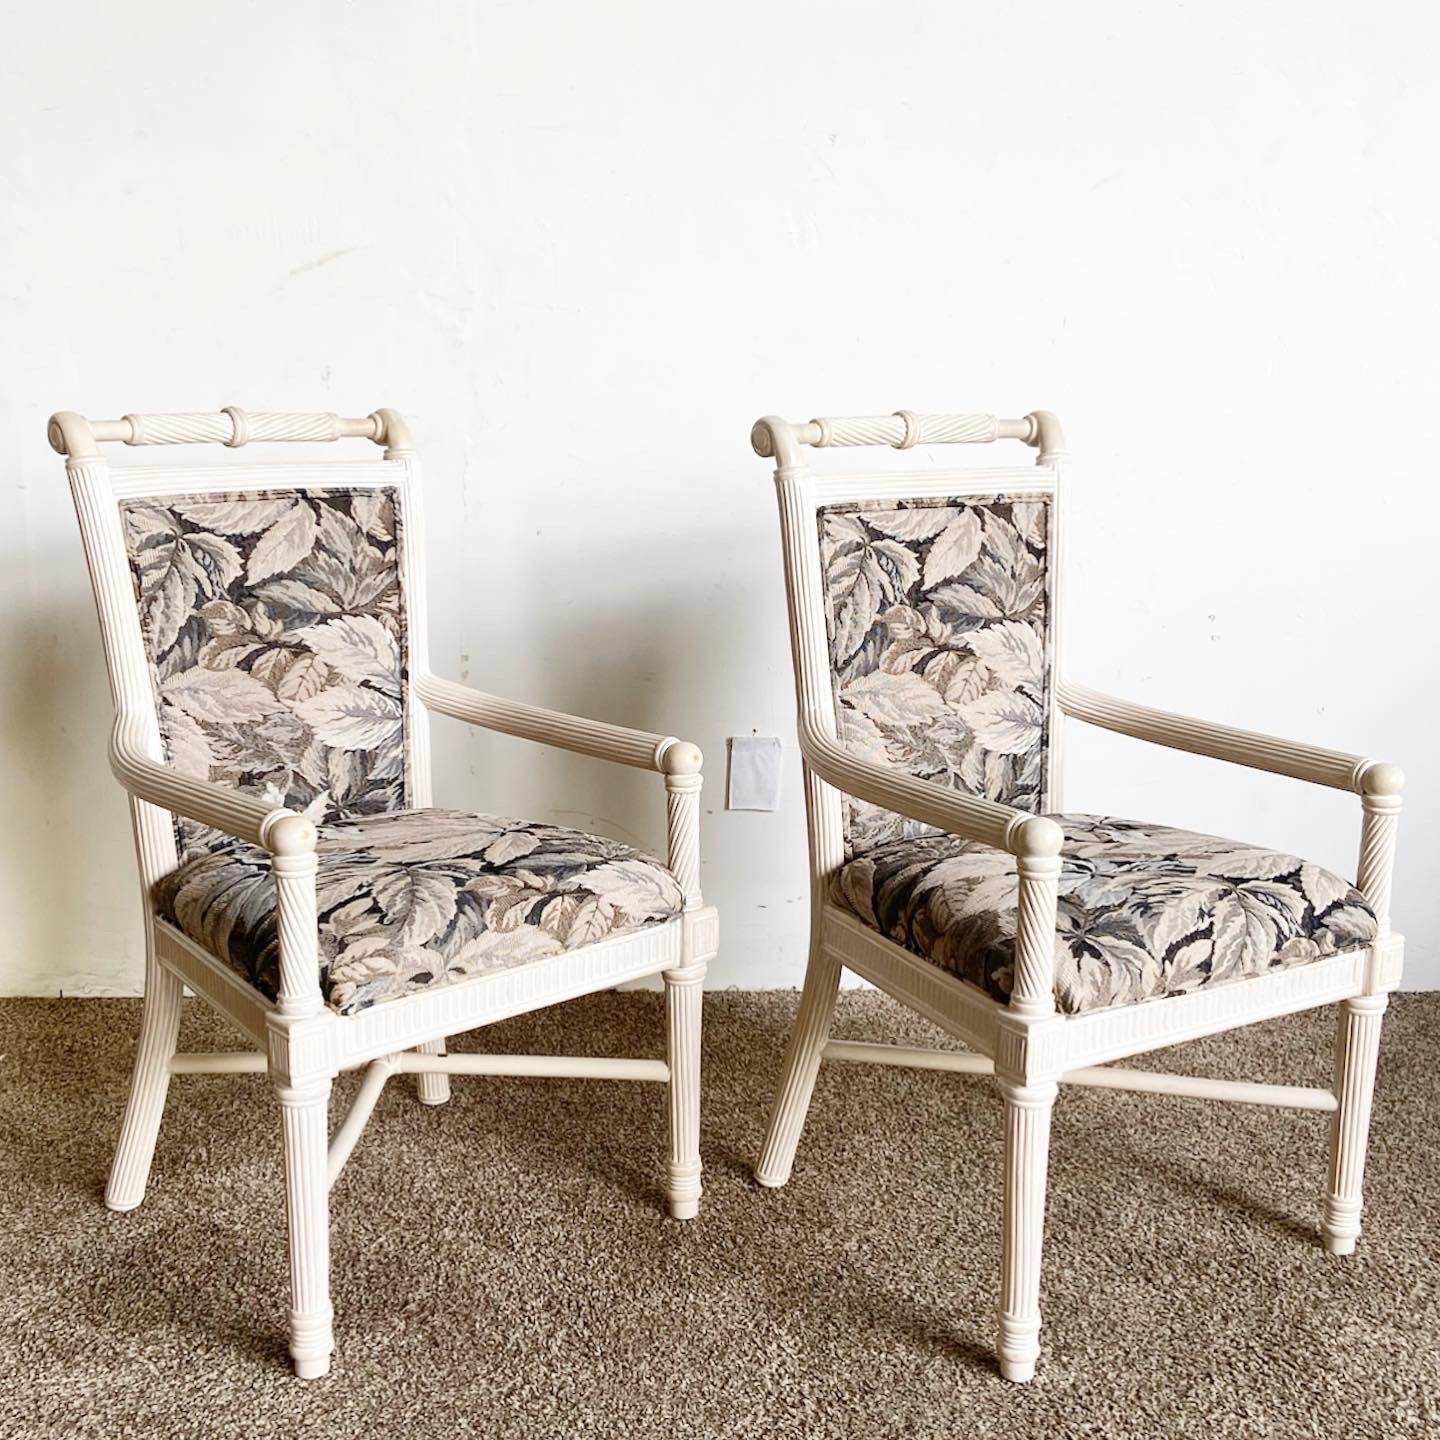 Introducing our pair of Boho Chic White Washed Twisted Pencil Reed Armchairs, effortlessly blending rustic charm with bohemian elegance. With their eye-catching design, comfortable seating, and versatile style, these chairs make a statement in any